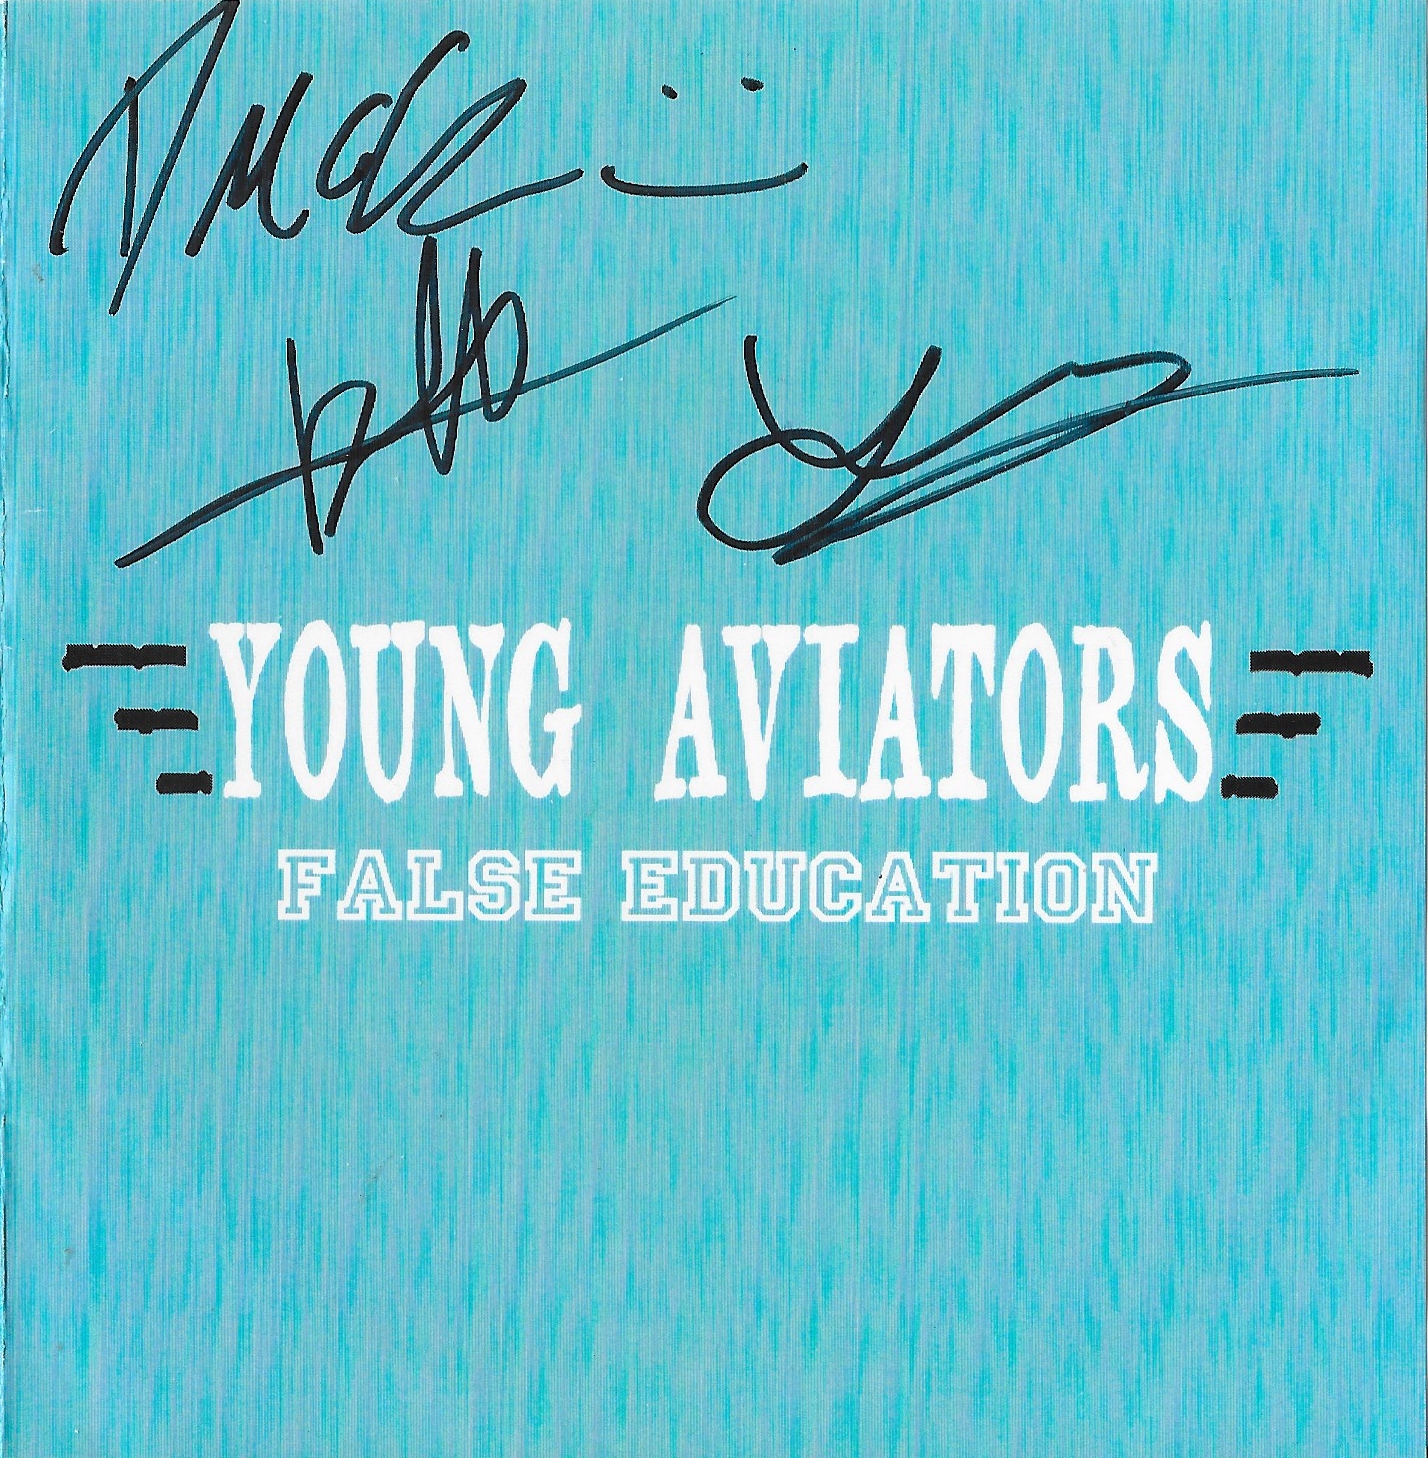 Picture of False education by artist Young Aviators 